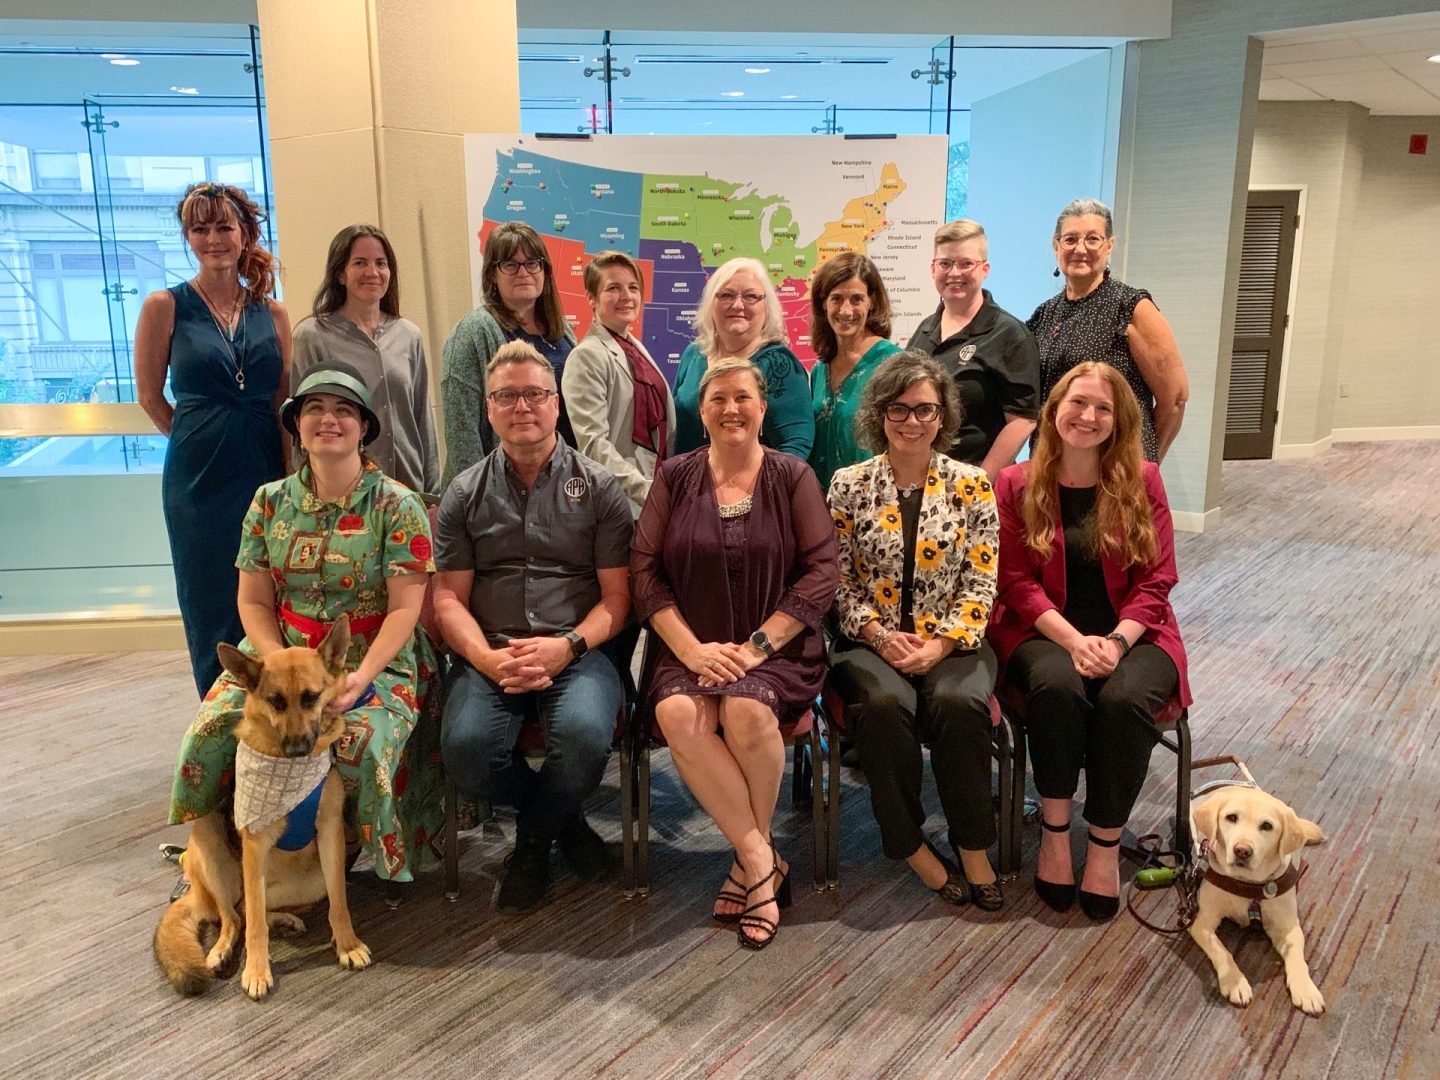 APH Outreach. Pictured Back Row from Left to Right: Alicia Wolfe, Jenny Wheeler, Stephanie Walker, Jennifer Brooks, Cindy Amback, Erin Weaver, Angela Dresselhaus, Valerie Mansfield. Pictured Front Row from Left to Right: Leslie Weilbacher with Guide Dog Fame, Jeff Schwartz, Leanne Grillot, Amy Campbell, Haley Blankenship.